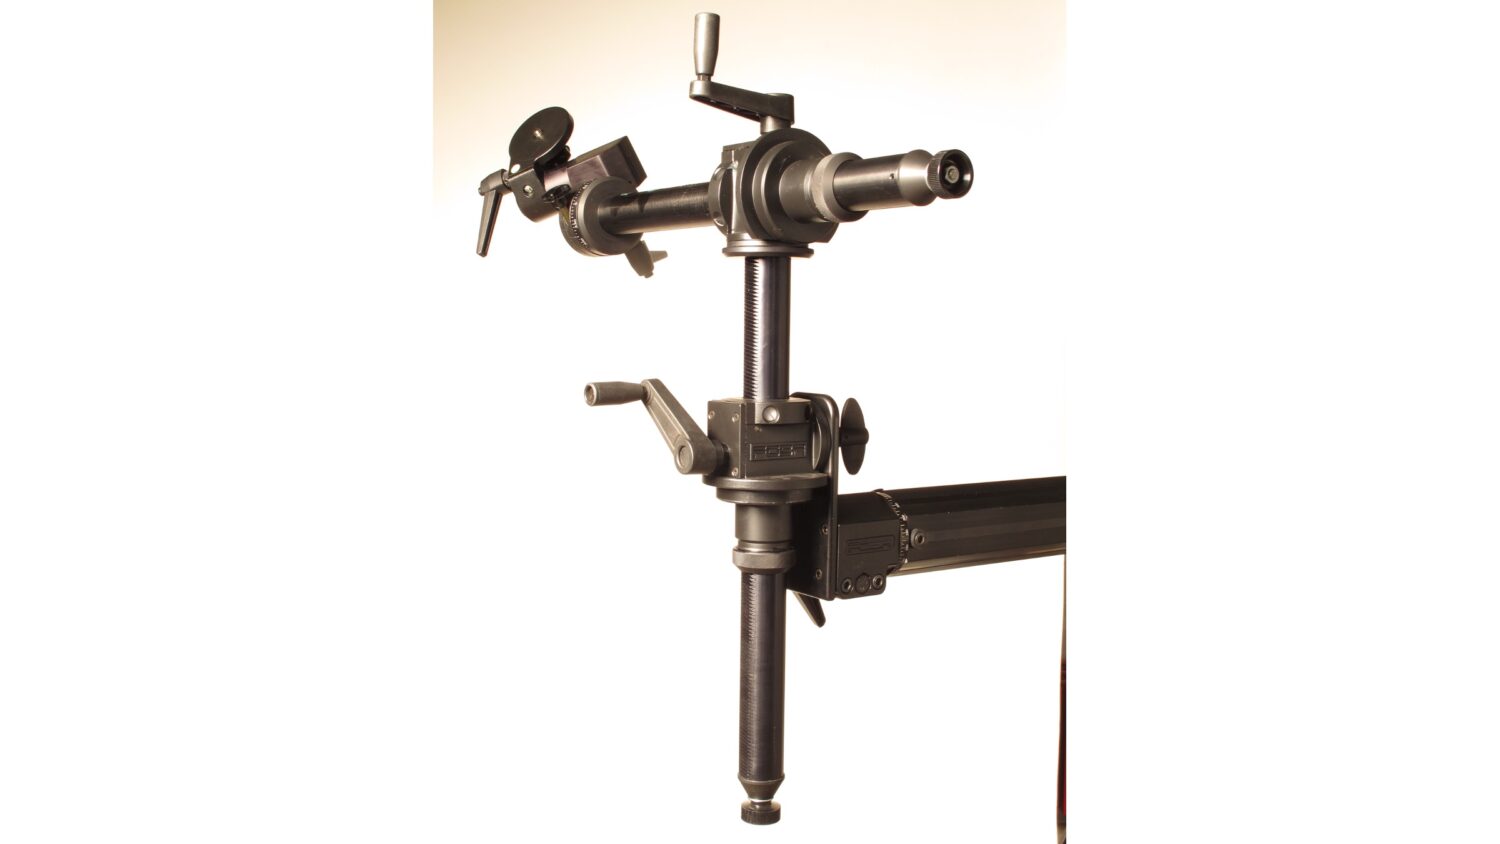 FOBA tripod accessories and tilting head mounted on a studio stand